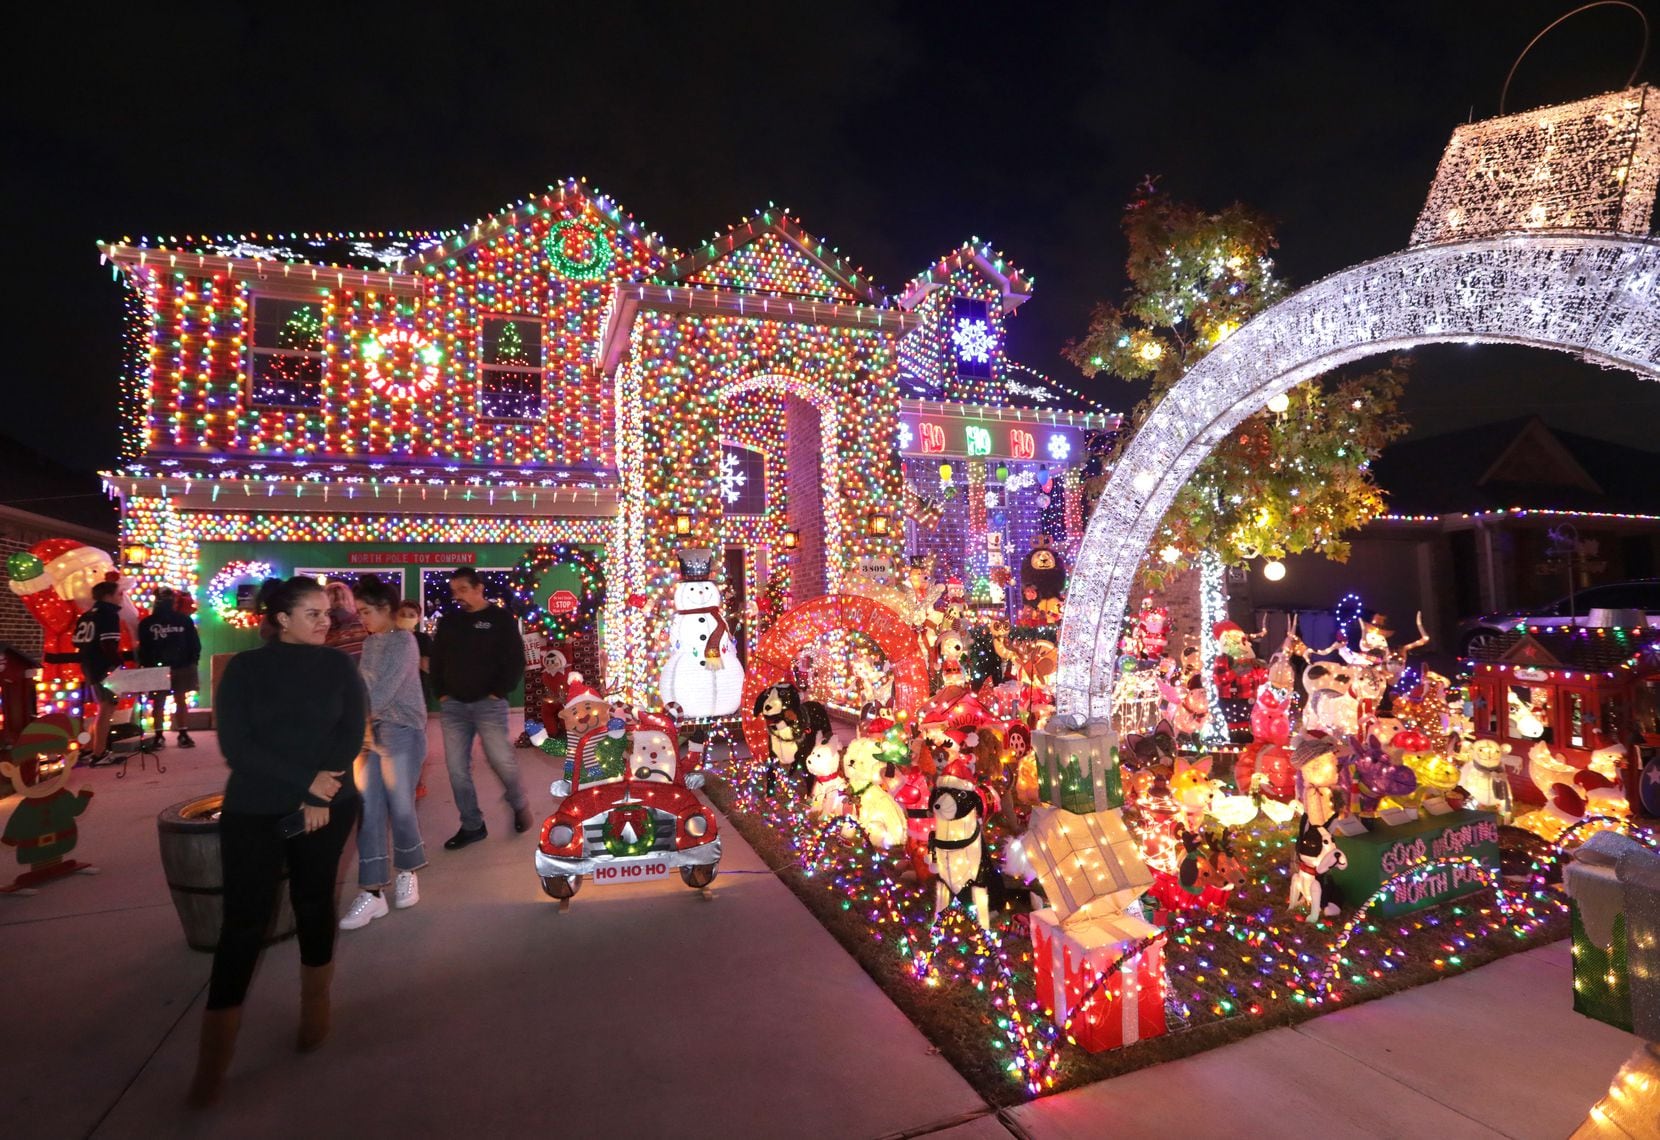 Visitors take in the Burkman family's holiday lights at their Frisco home.